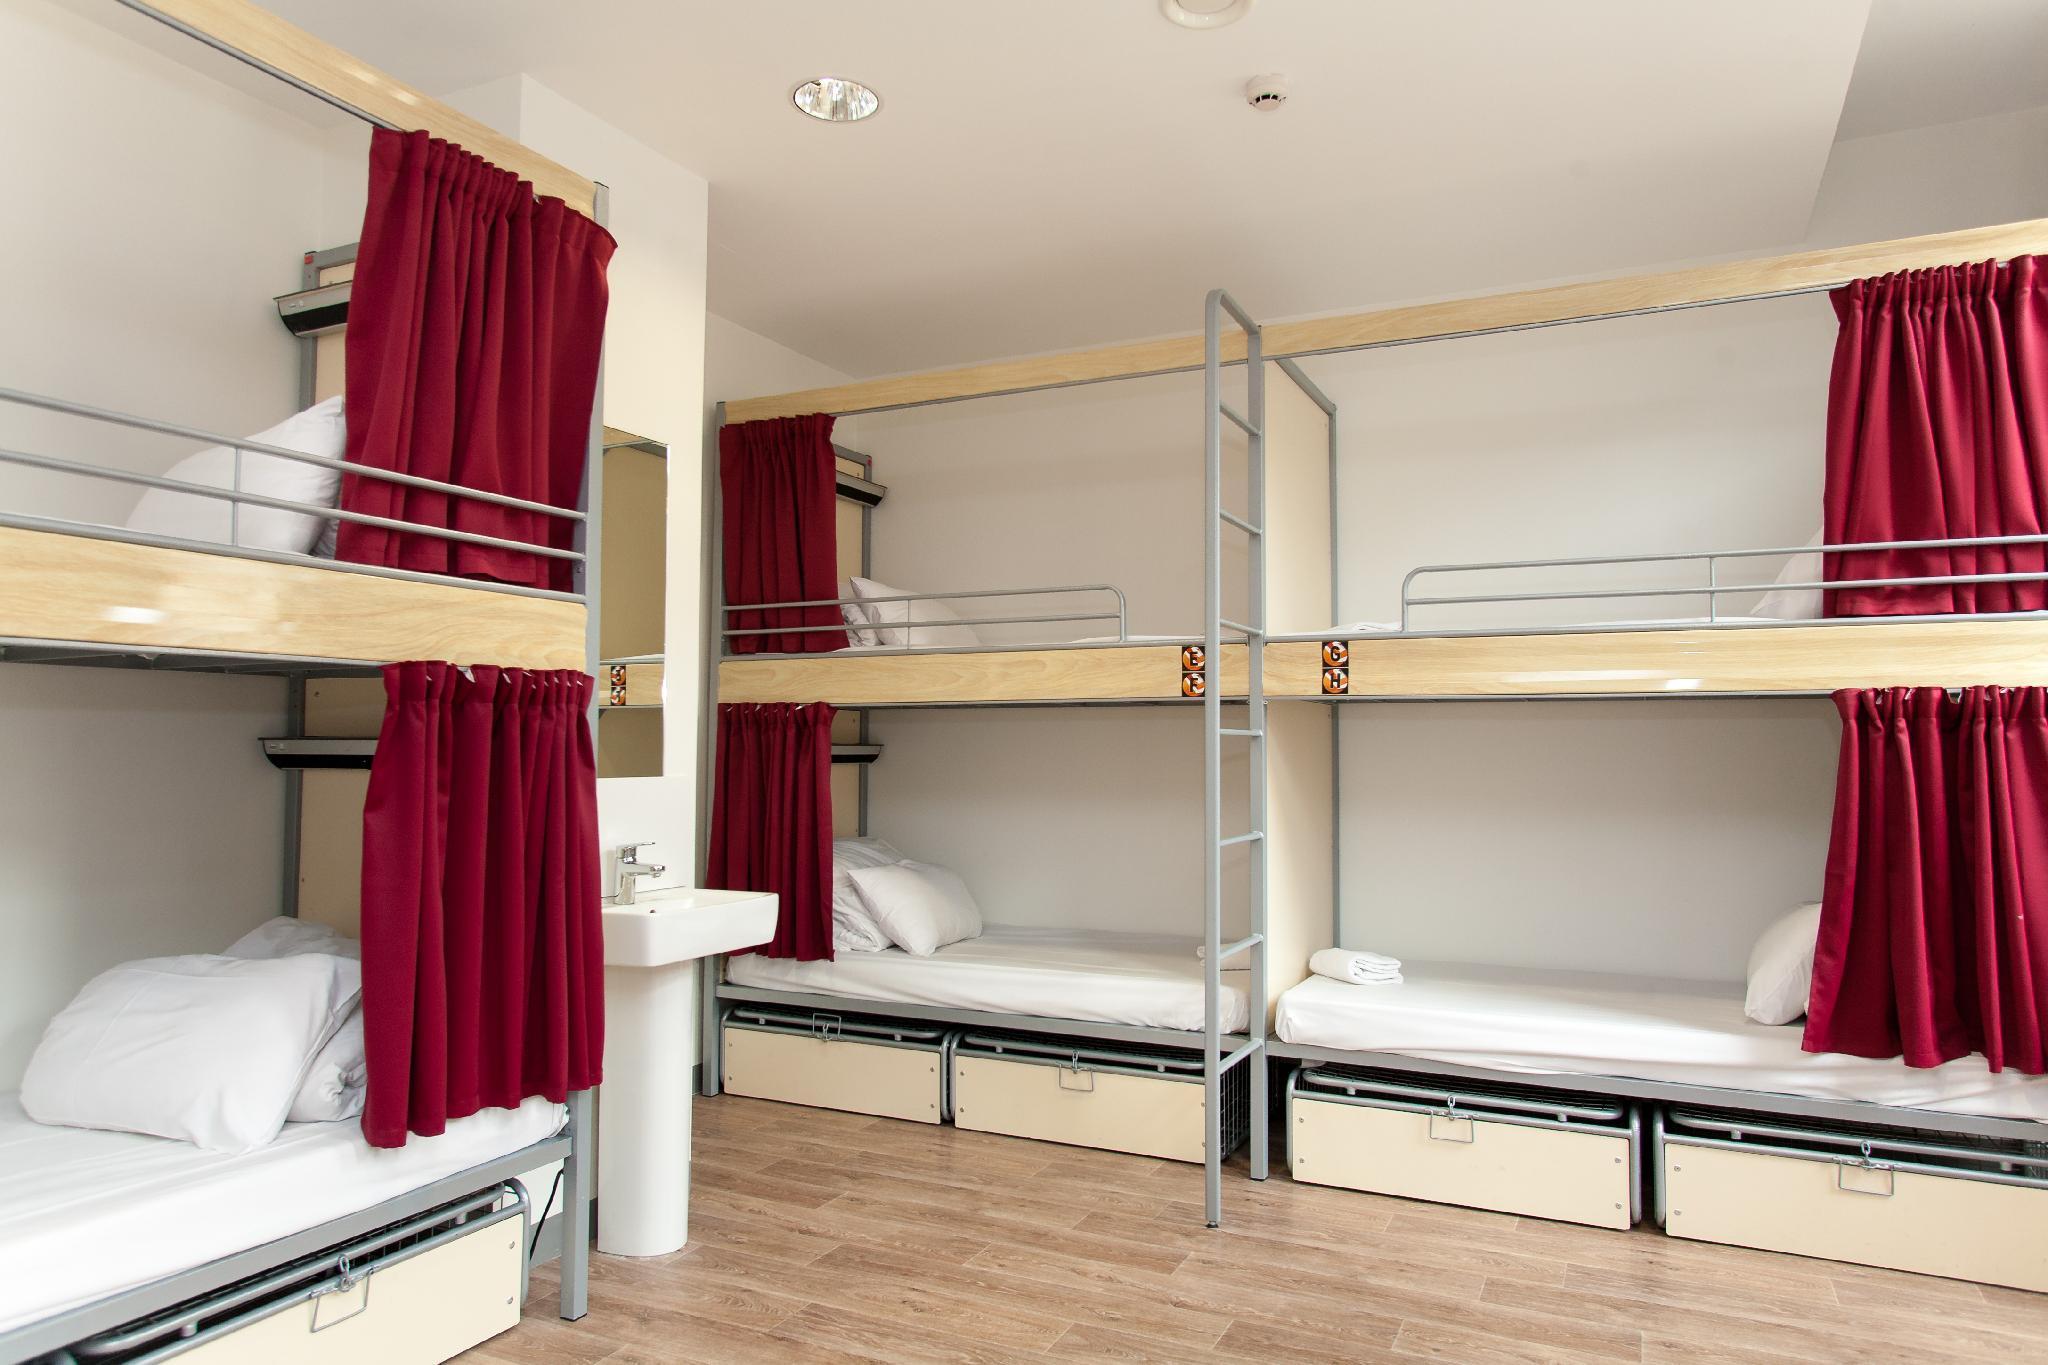 1 Person in 8-Bed Dormitory - Mixed